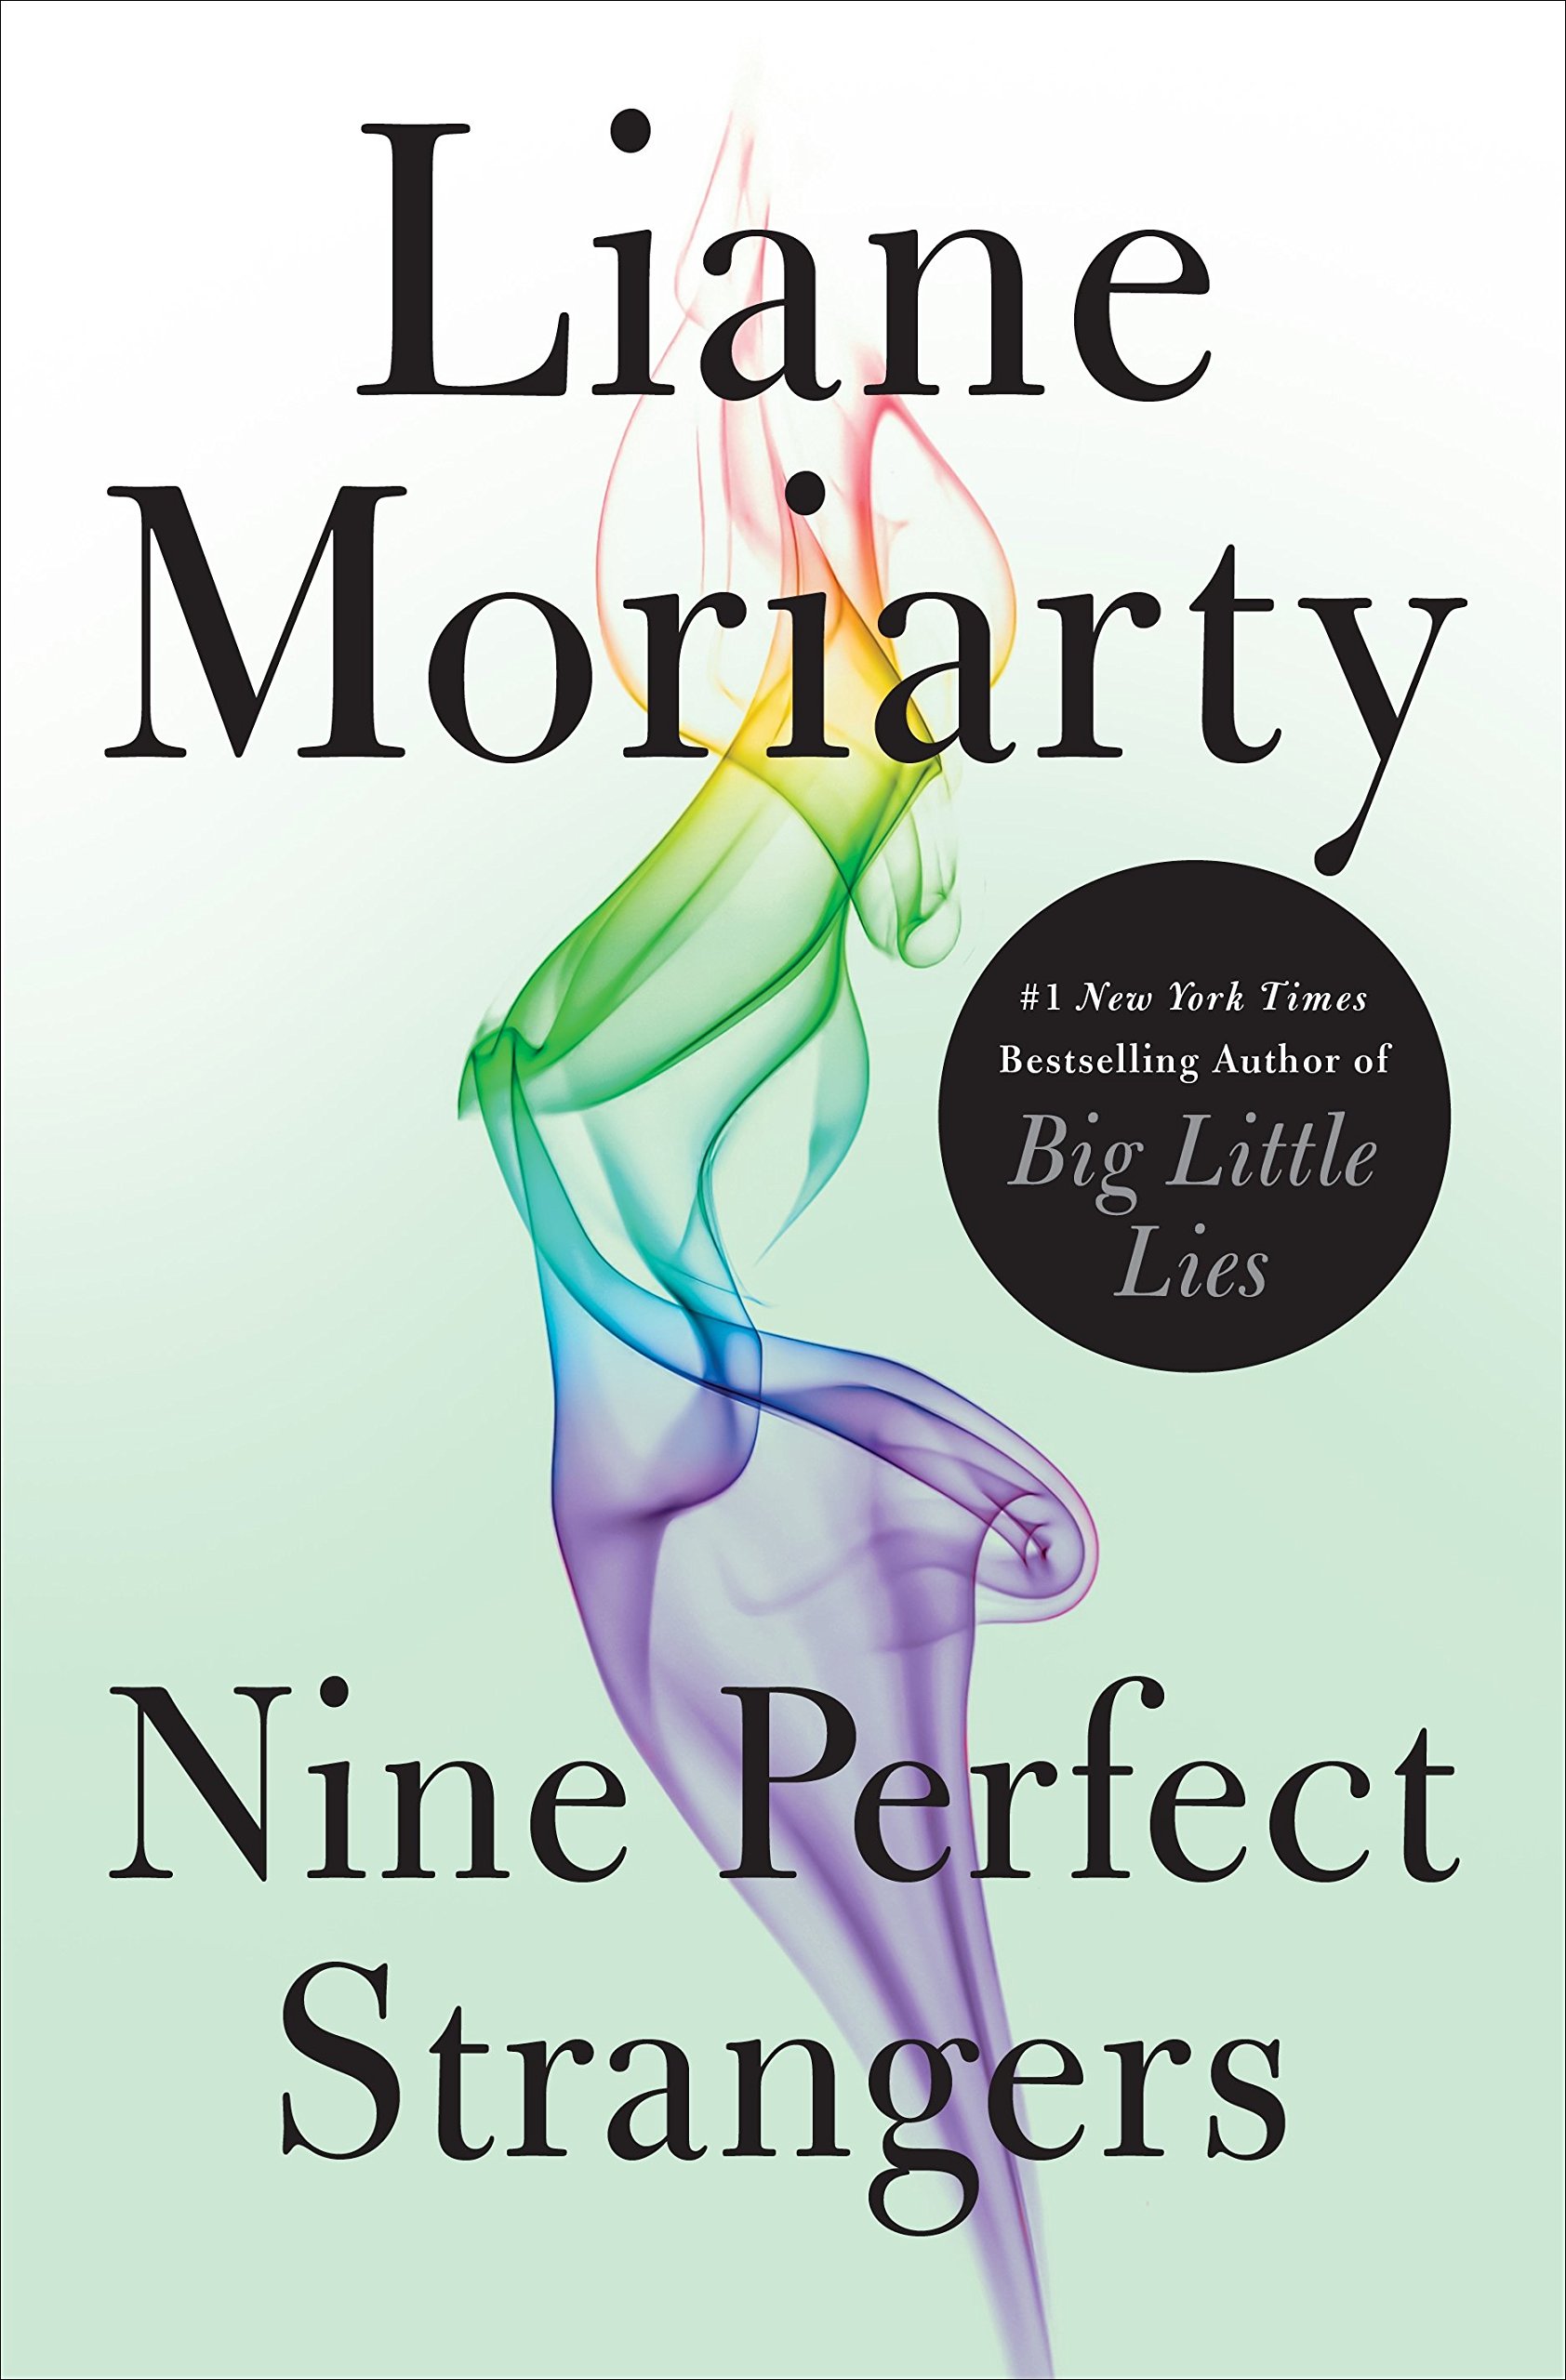 Nine Perfect Strangers but Liane Moriarty